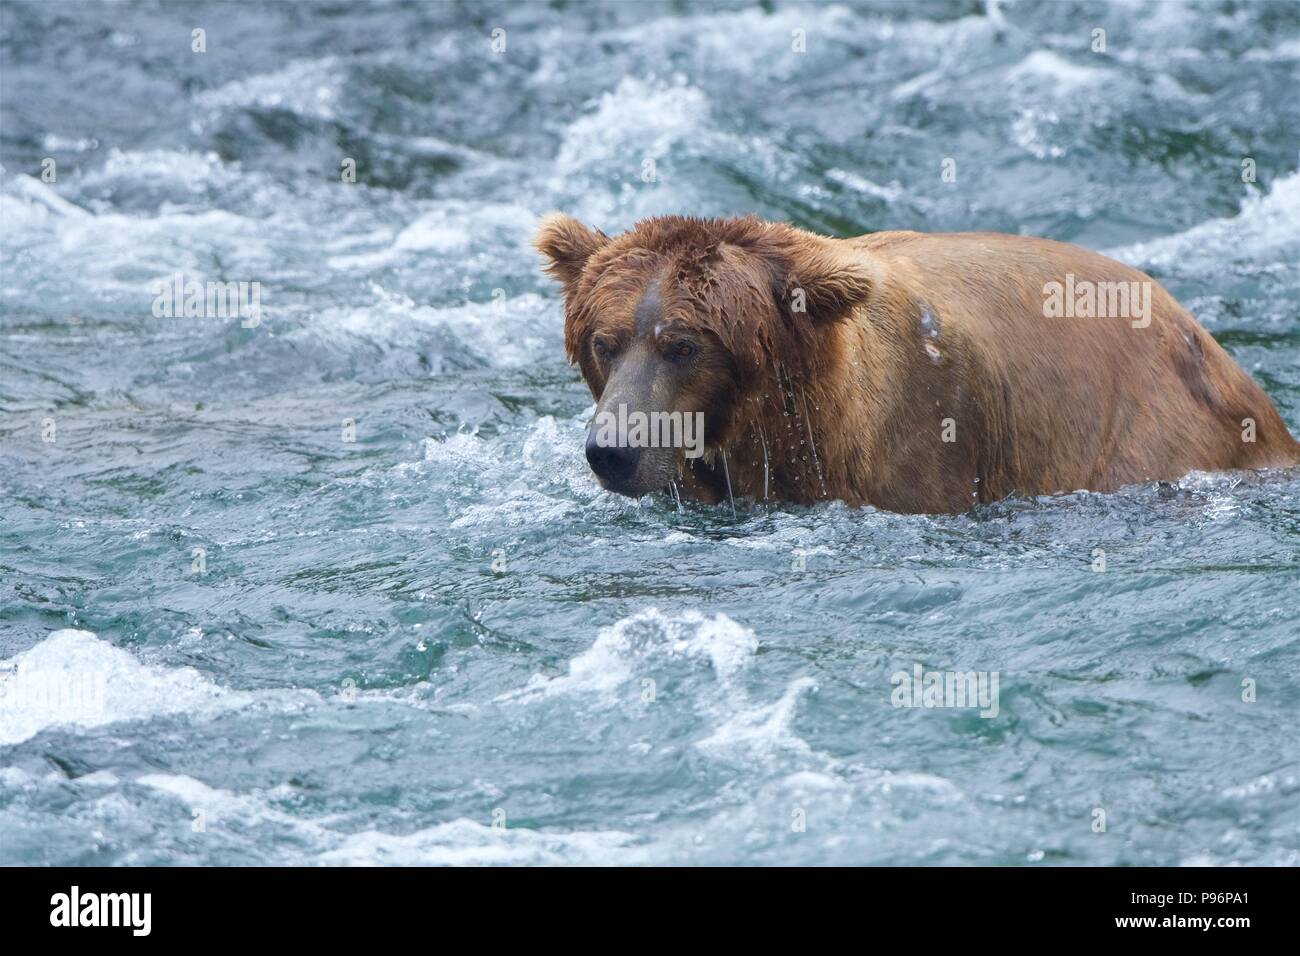 A Grizzly bear patiently waits in the frigid after, trying to catch a salmon in Brooks Falls, Katmai, Alaska Stock Photo